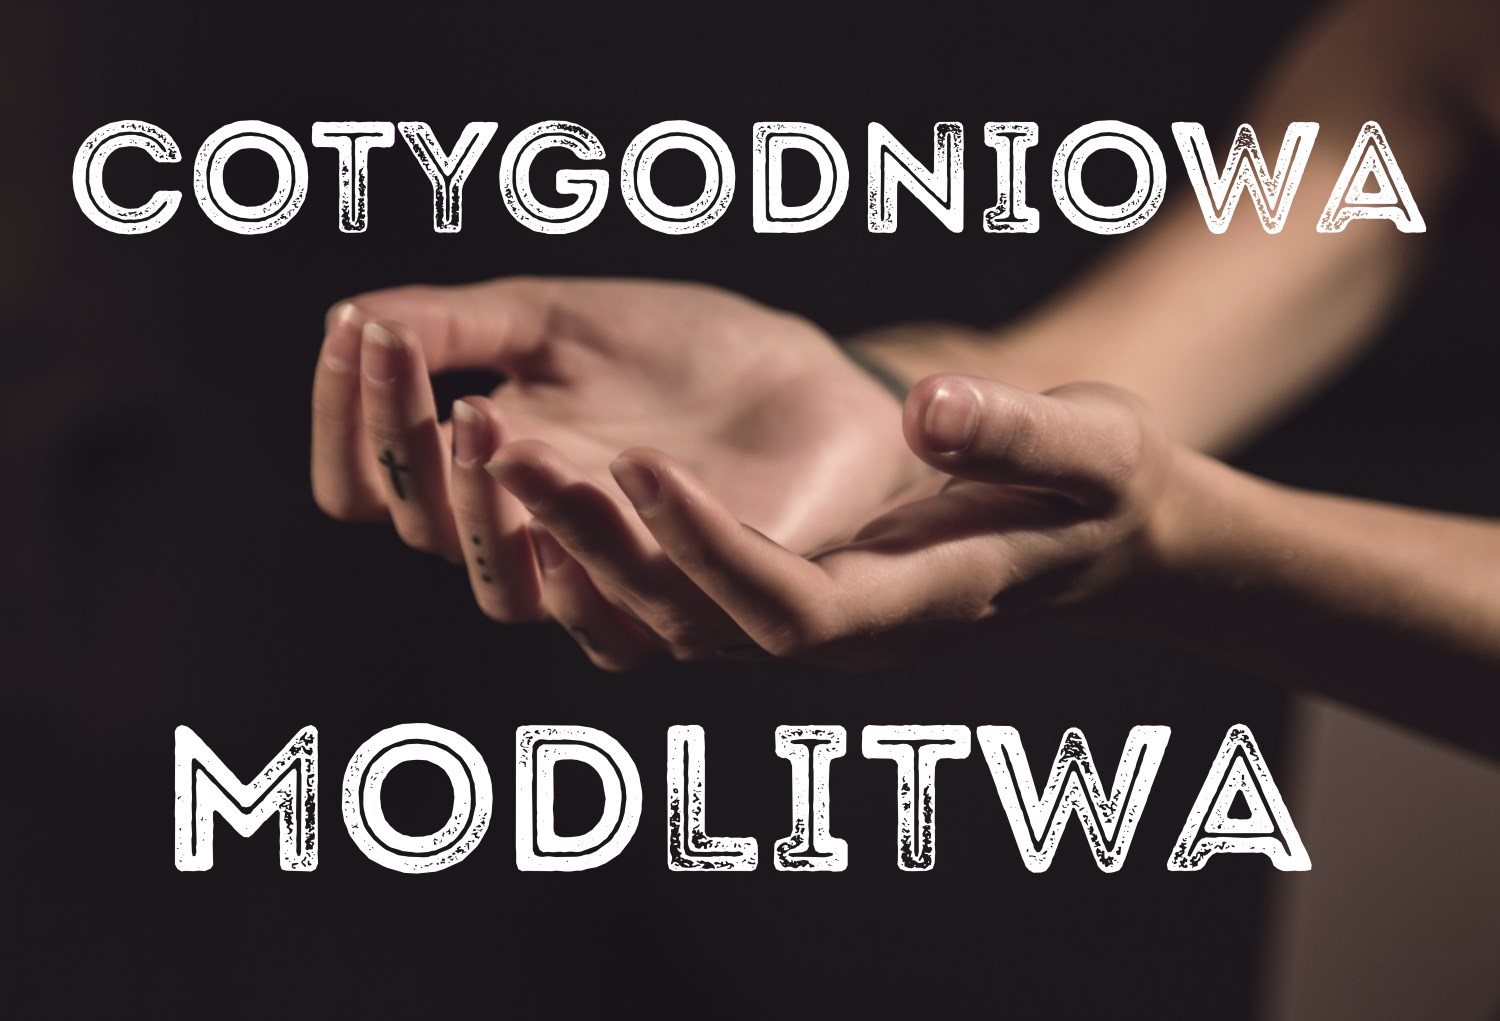 You are currently viewing Cotygodniowa Modlitwa